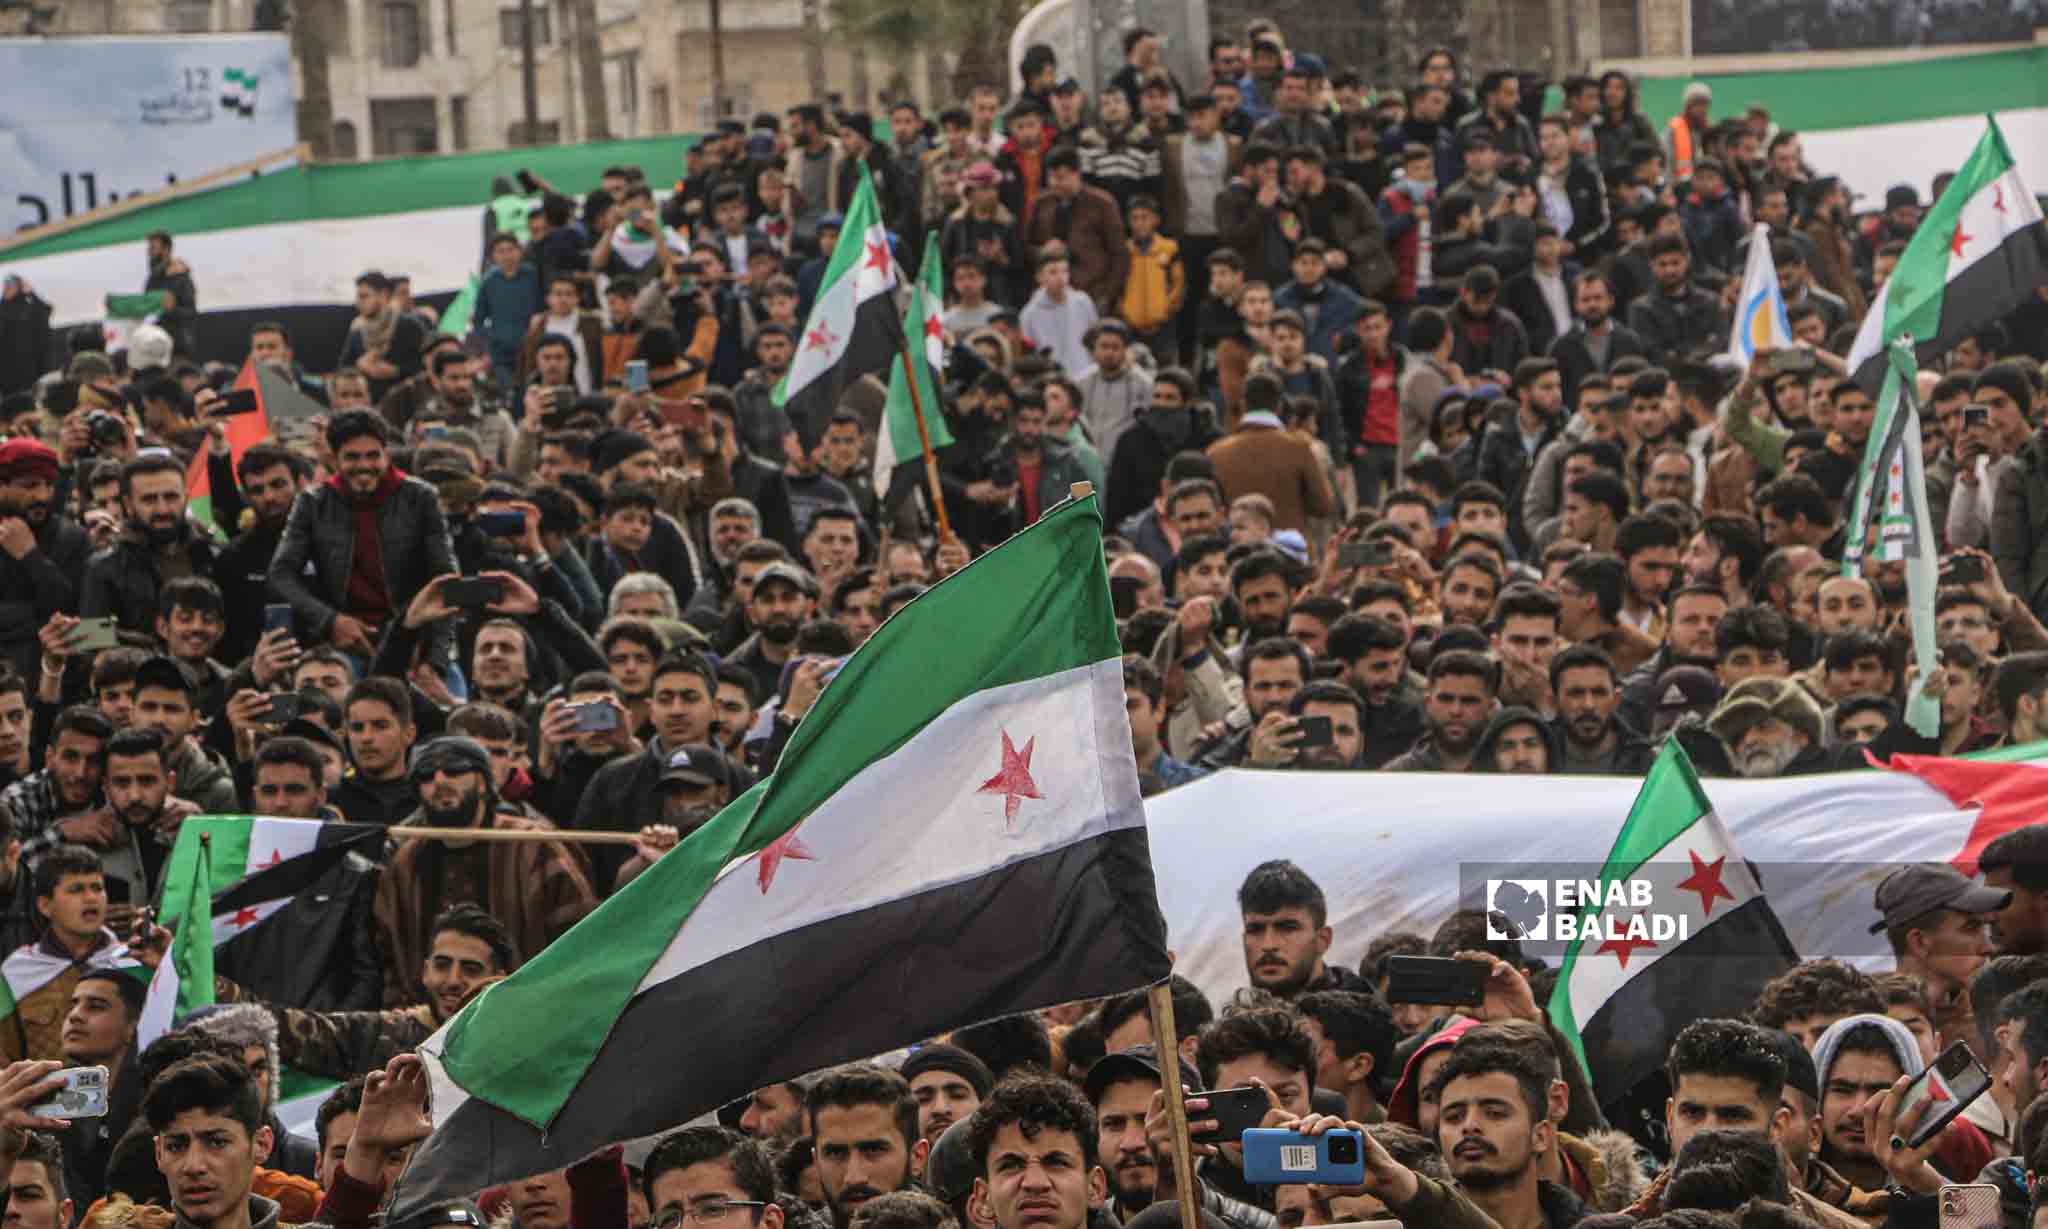 A demonstration in Idlib city to commemorate the 12th anniversary of the Syrian revolution - March 15, 2023 (Enab Baladi/Anas al-Khouli)